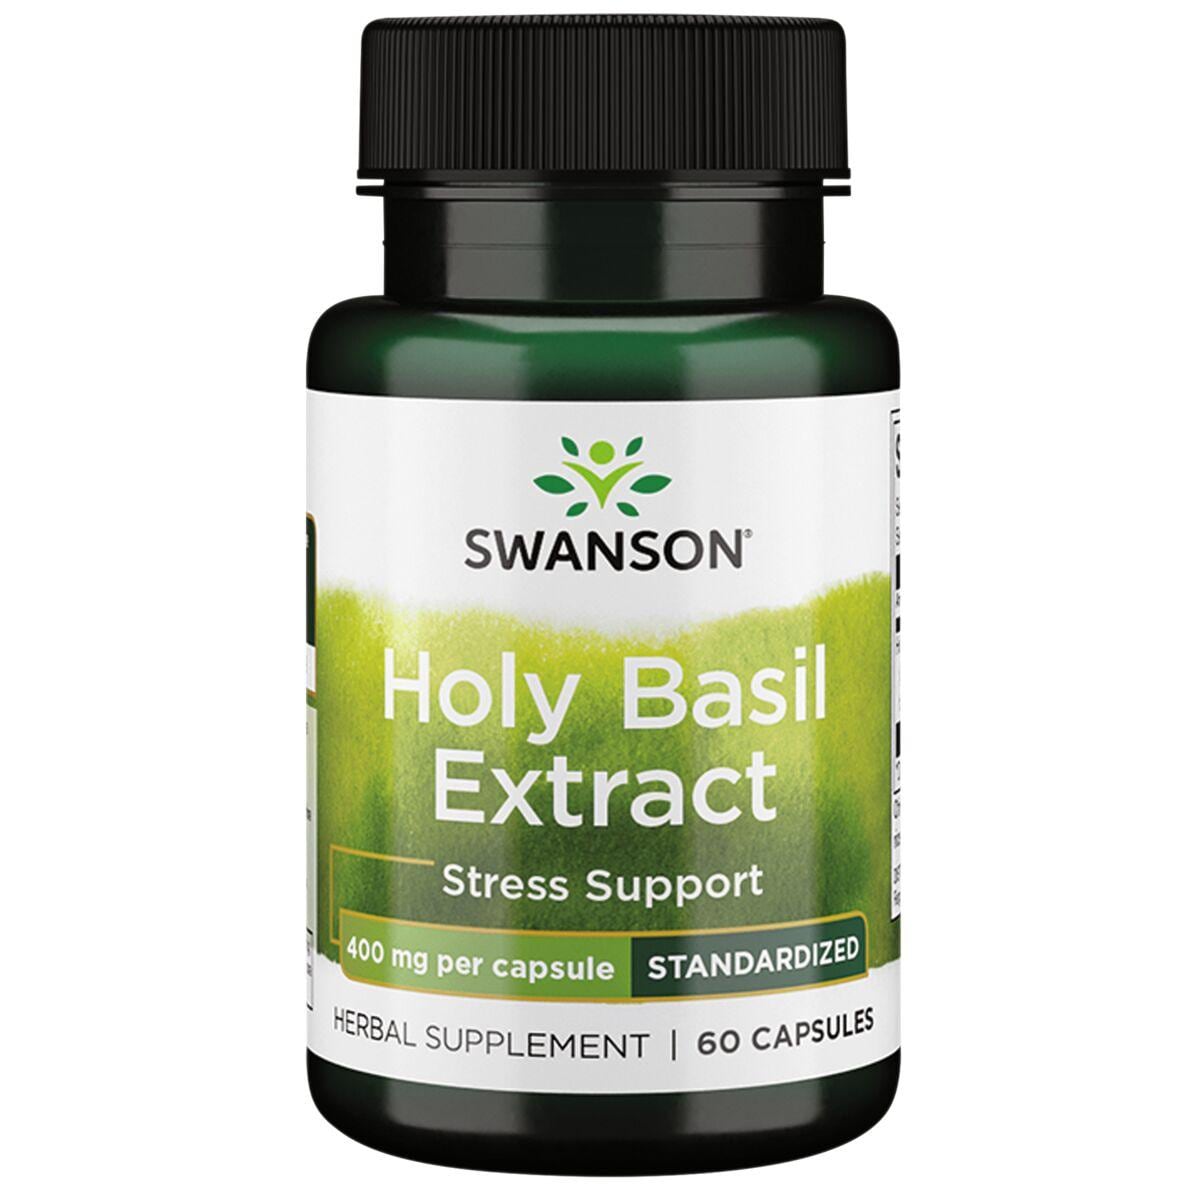 Swanson Superior Herbs Holy Basil Extract - Standardized Vitamin | 400 mg | 60 Caps